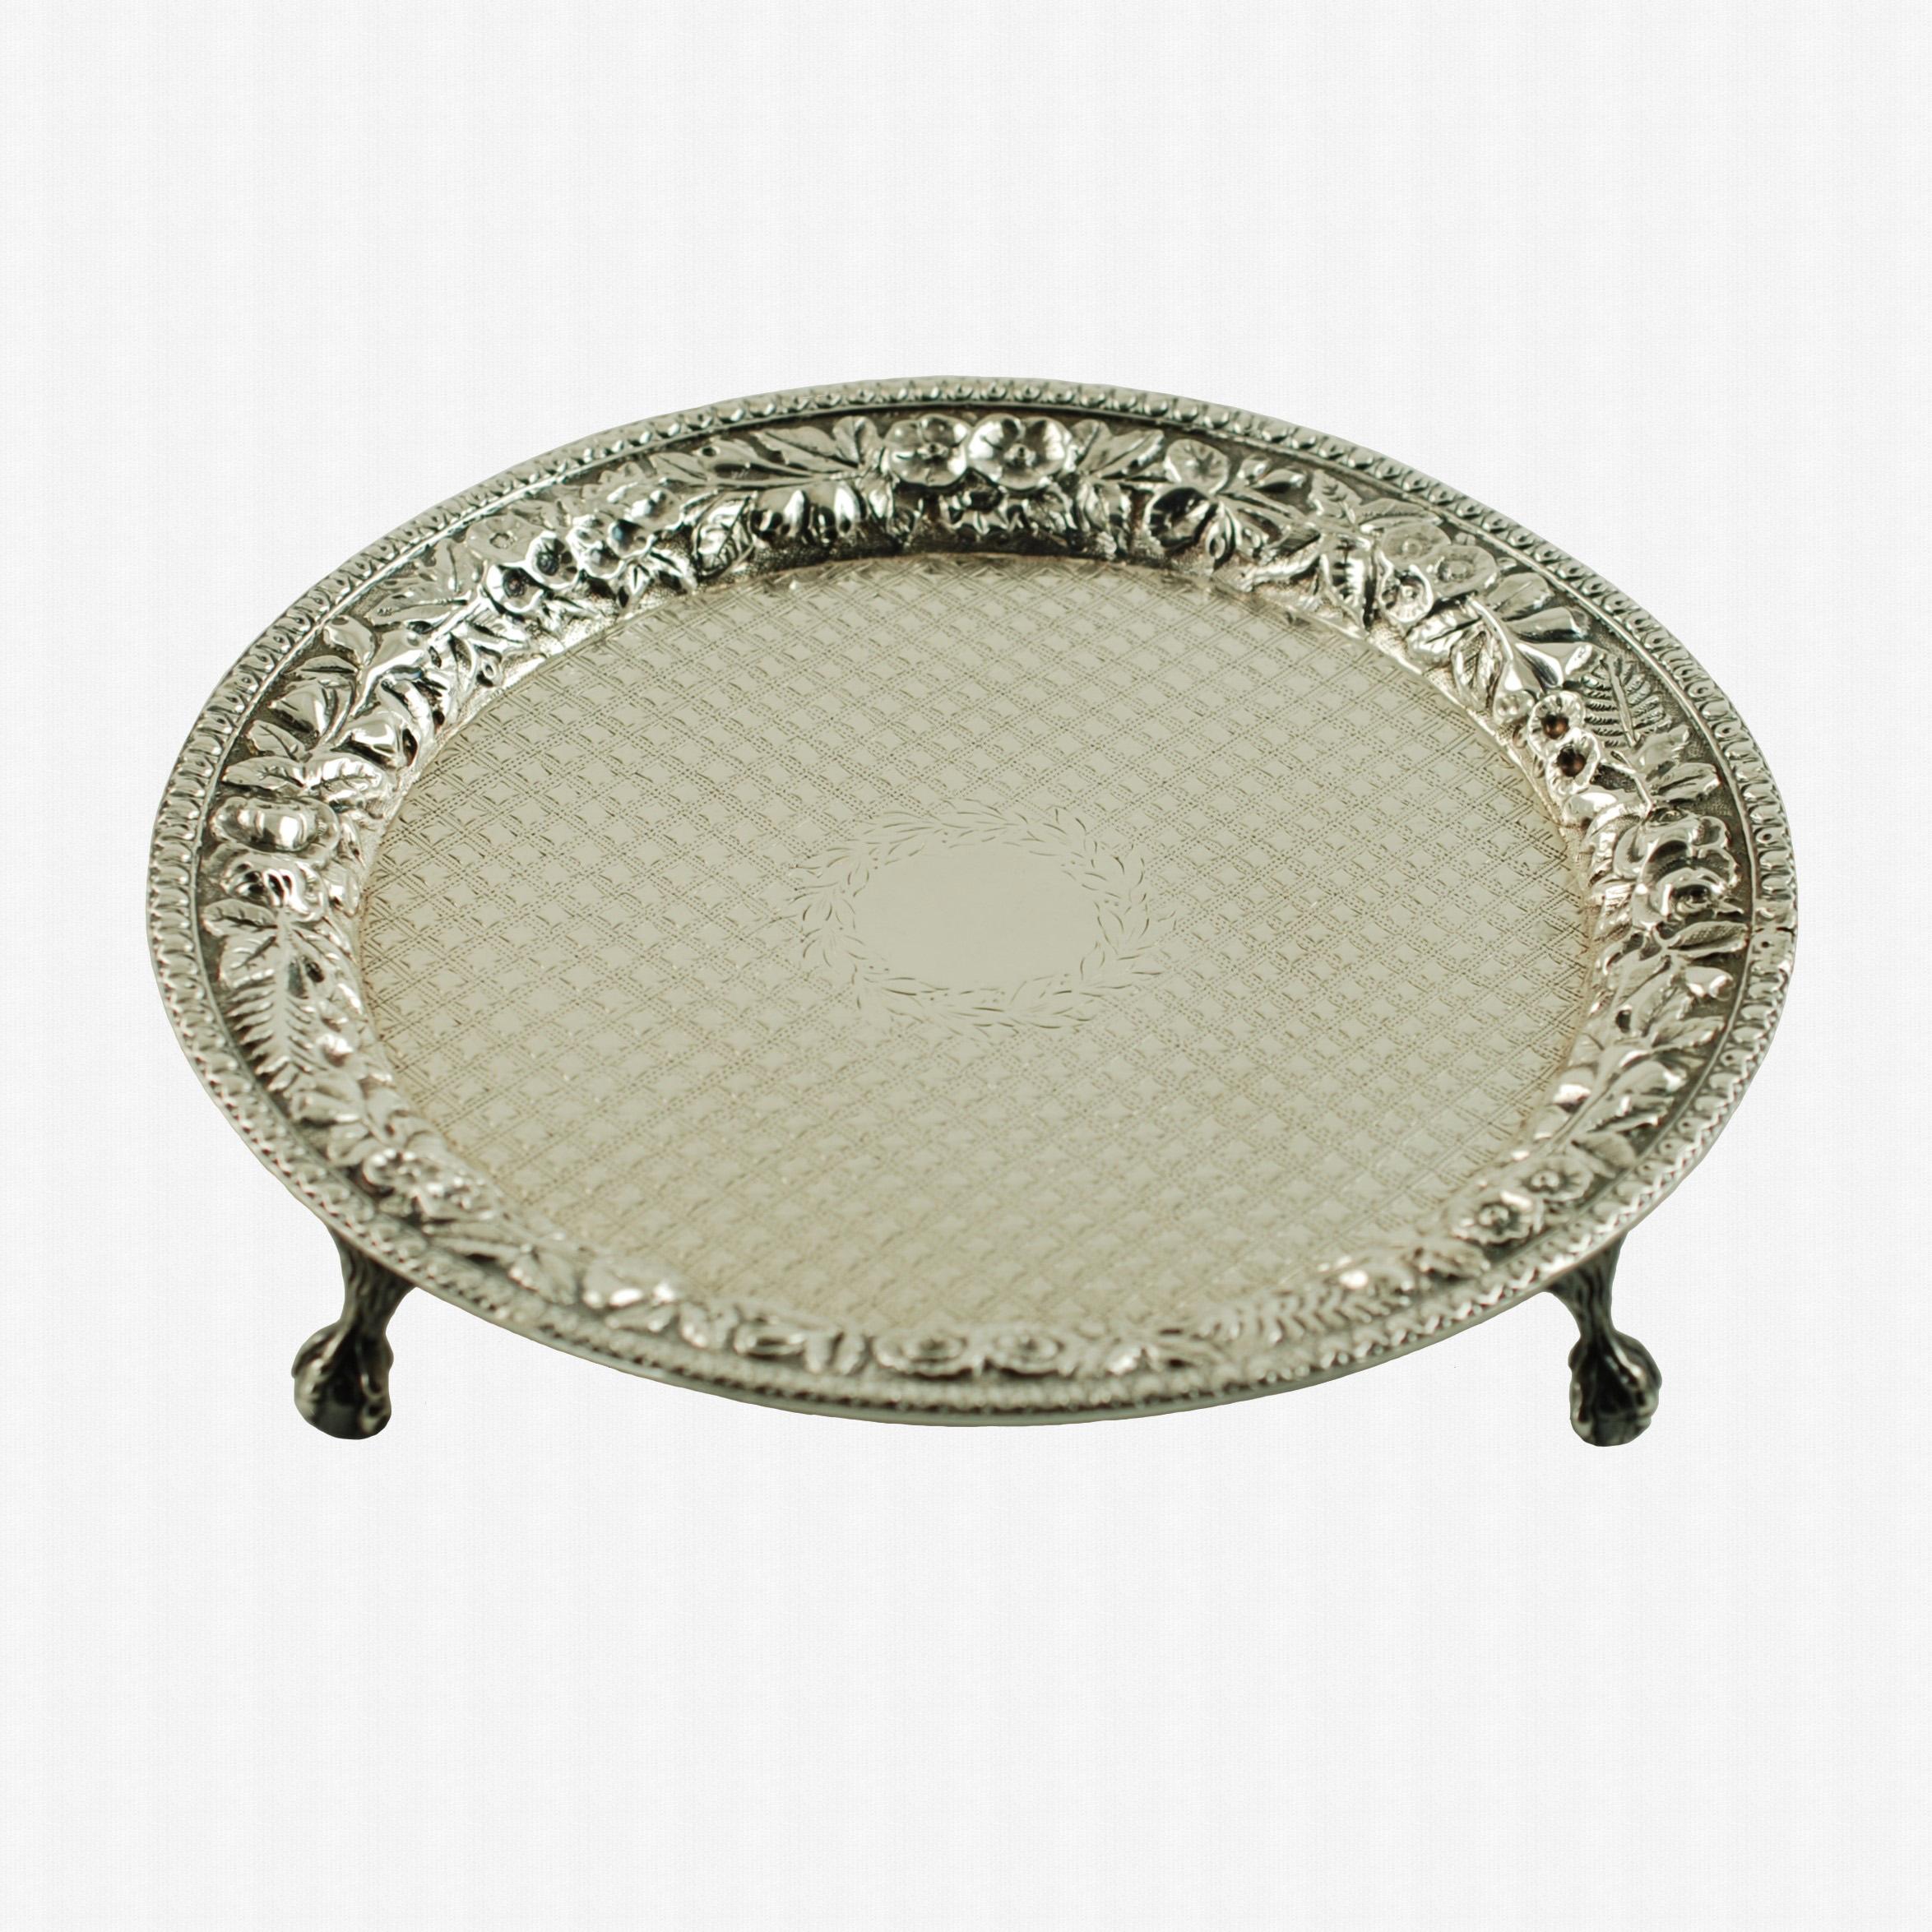 This elegant late 19th century silver salver was made by Baltimore, Maryland based silver manufacturer, S. Kirk & Son. The piece features an ornate chased floral shoulder finished with a banded rim. The face of the tray is decorated with an